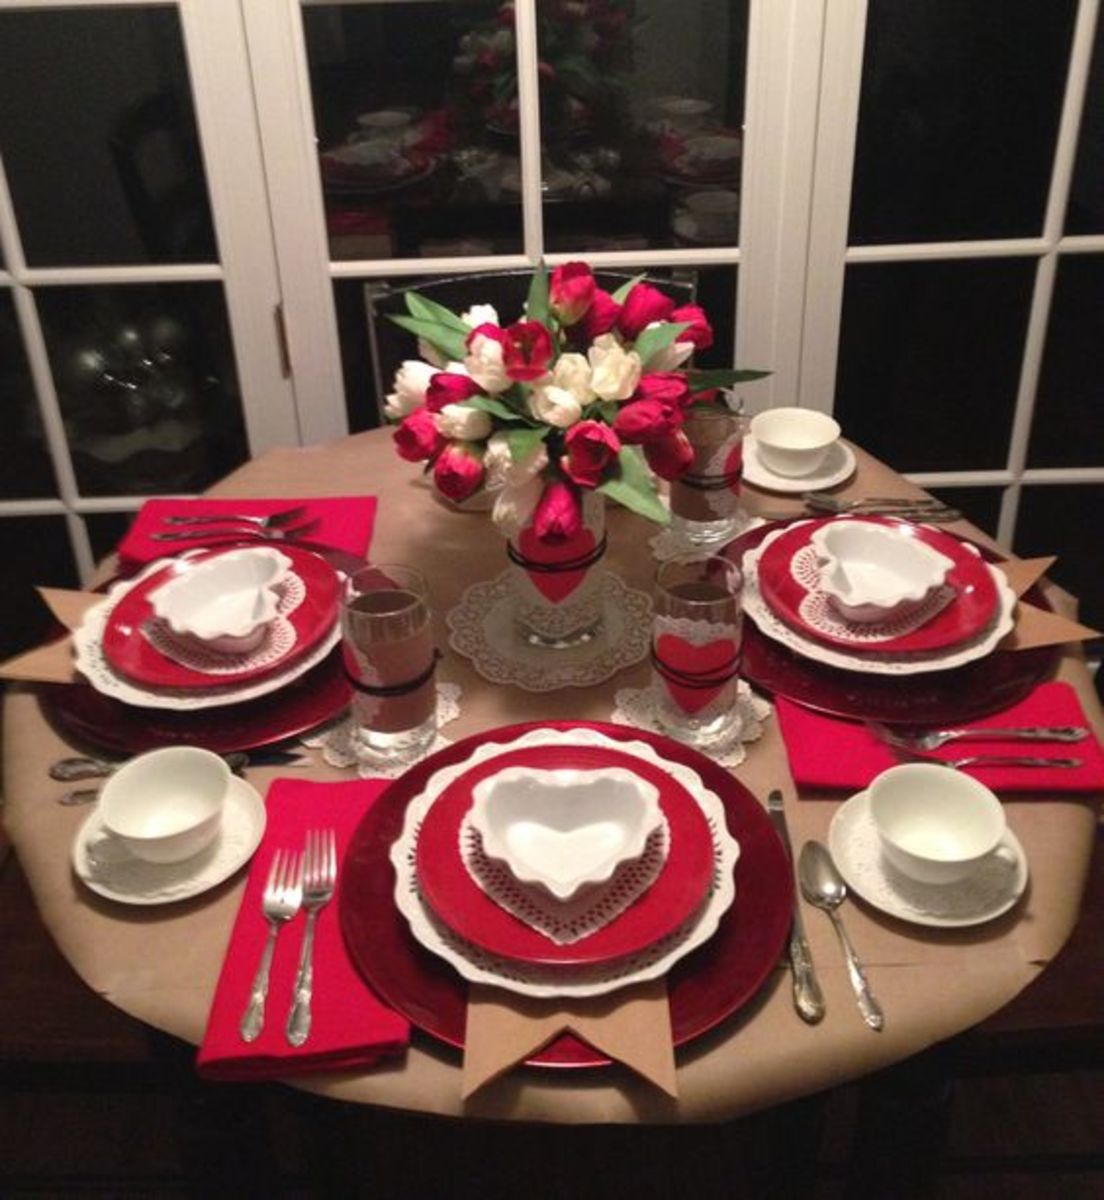 50+ Romantic Valentines Table Setting Ideas for a Cozy Night In - HubPages